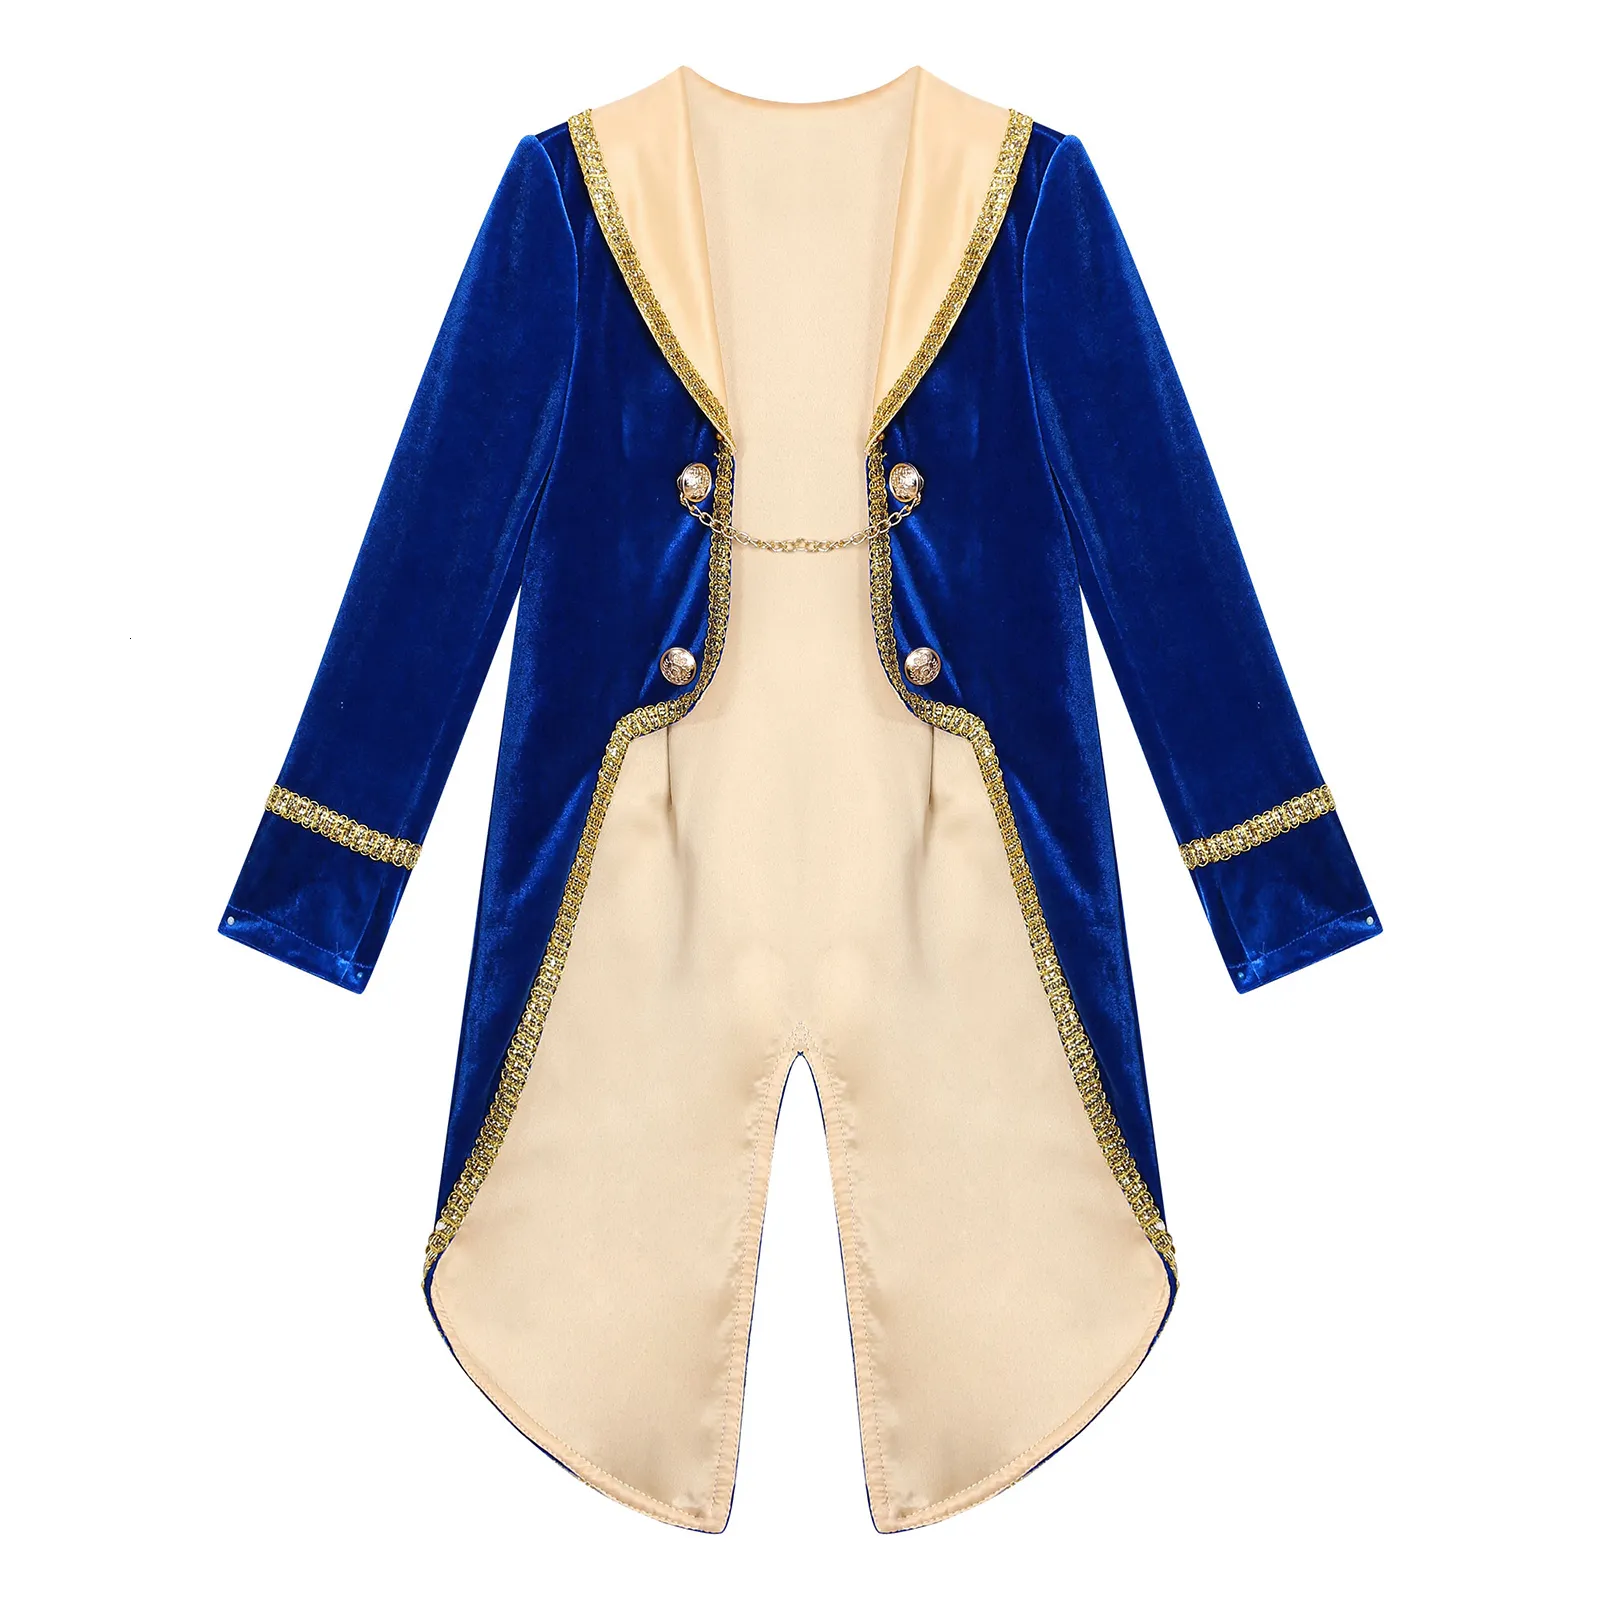 Jackets Toddler Kids Baby Boys Tailcoat Jacket Halloween Prince Cosplay Costume Long Sleeves Tuxedo Coat For Role Play Party Performance 230818